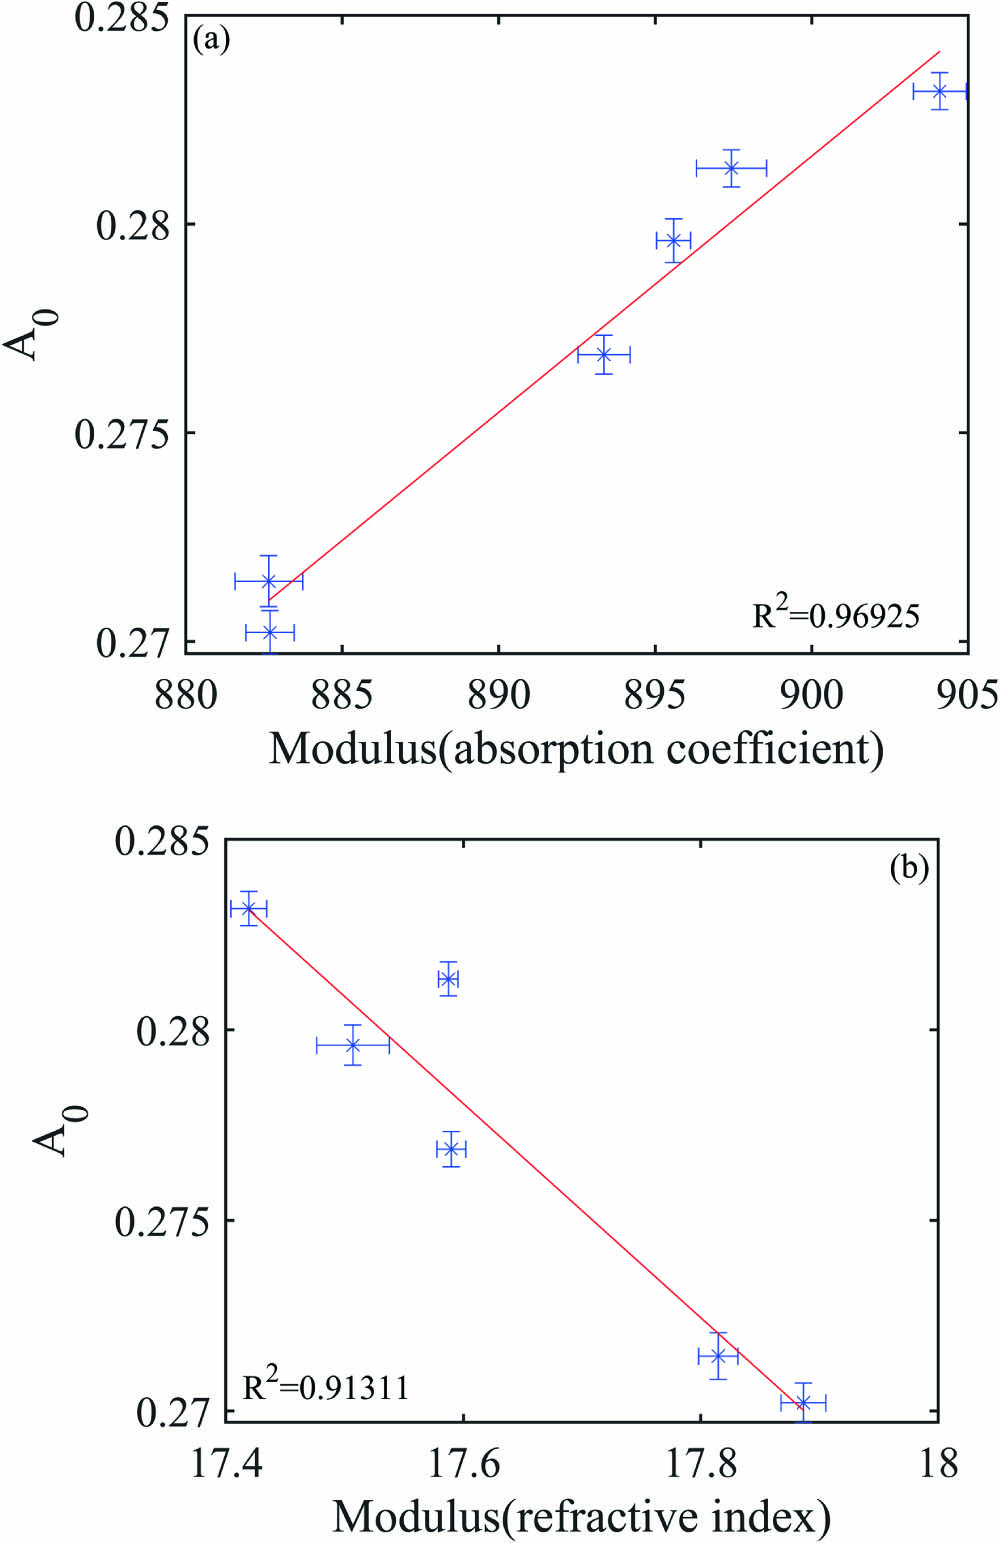 Linear fitting between A0 and modulus of the (a) absorption coefficient and (b) refractive index.